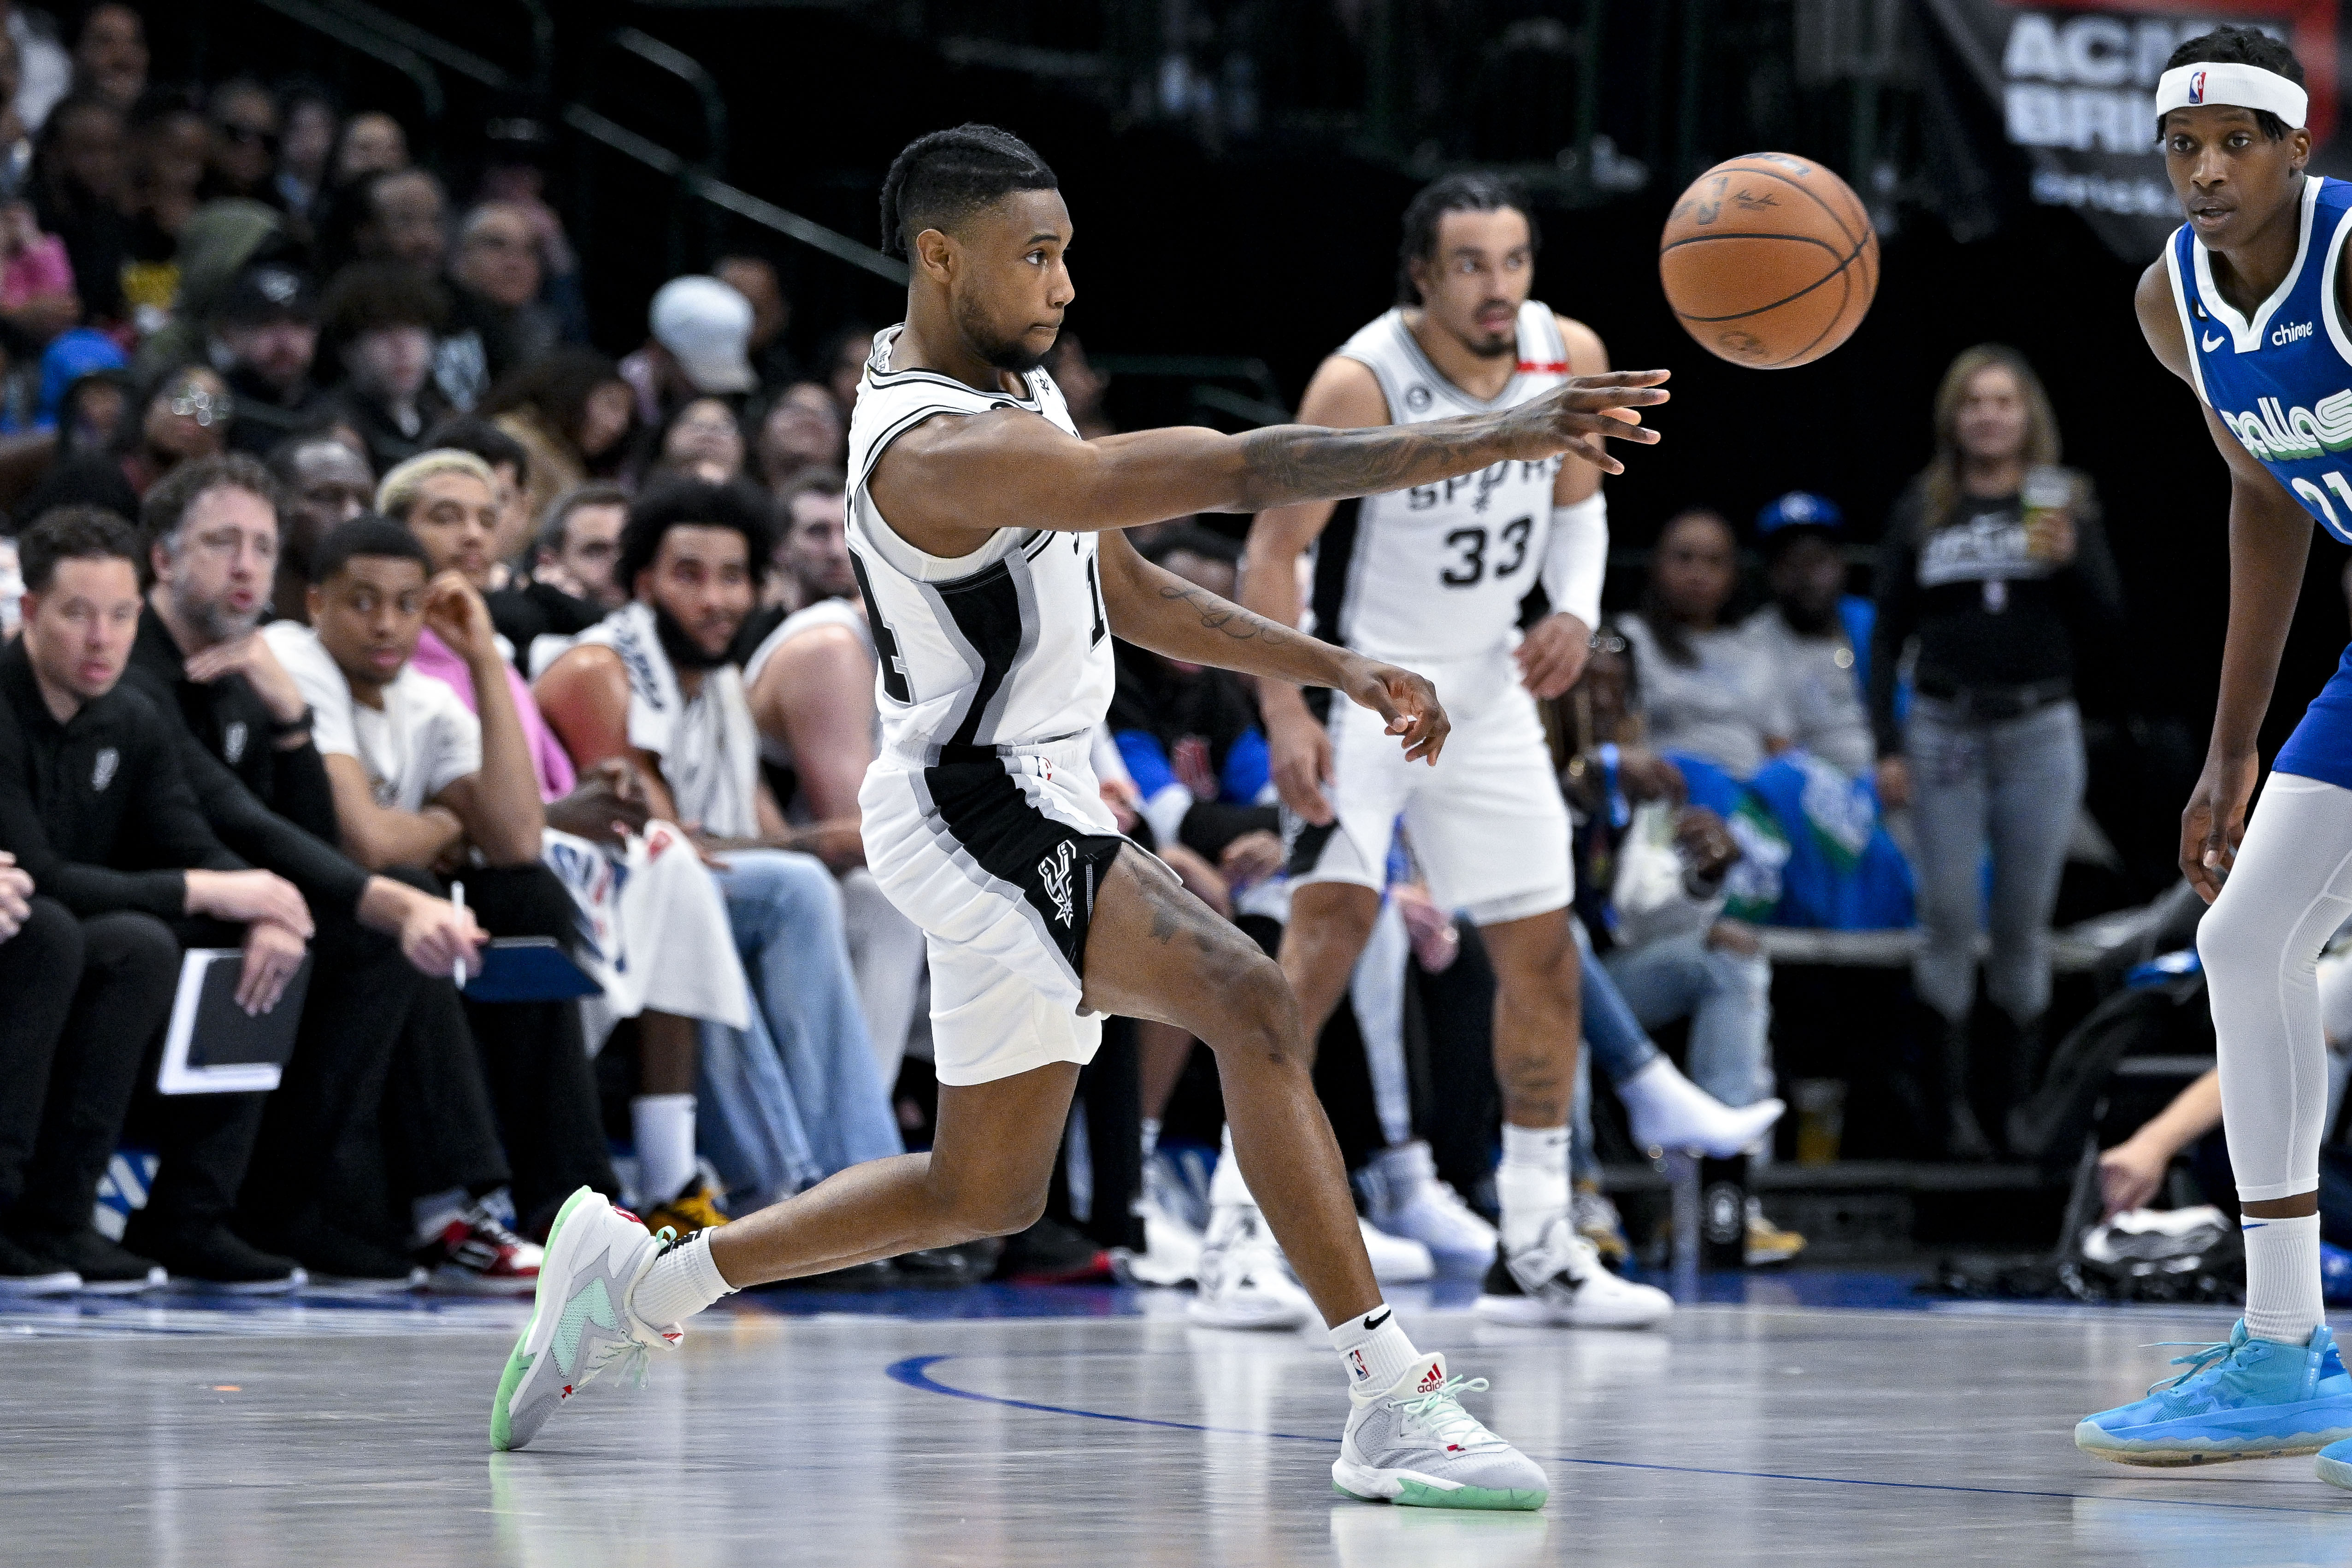 Dominick Barlow paces Spurs in rout of Mavericks